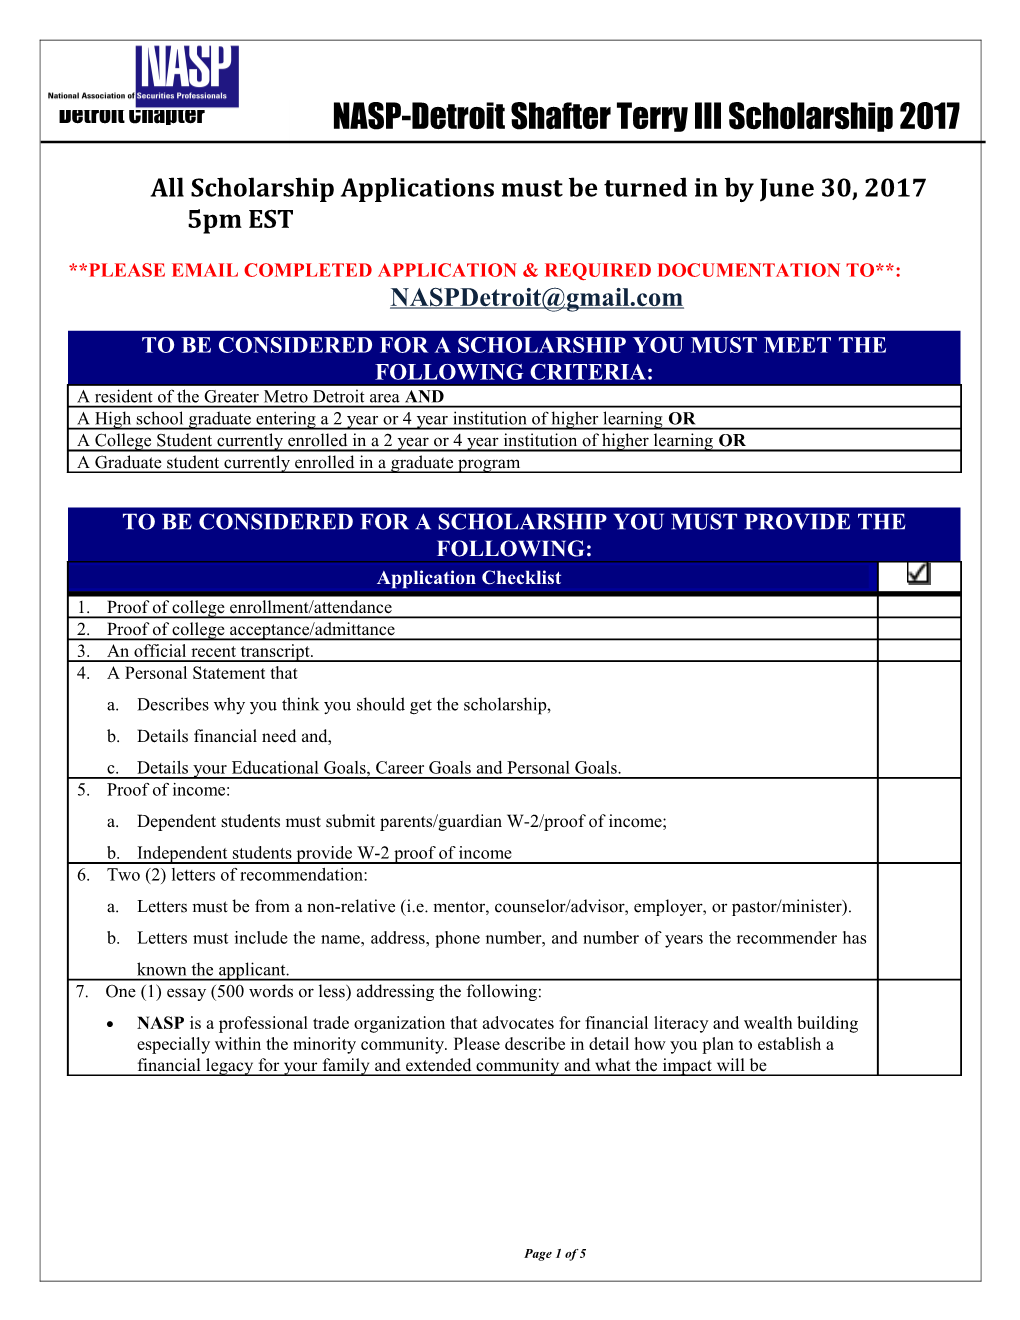 All Scholarship Applications Must Be Turned in by June 30, 2017 5Pm EST